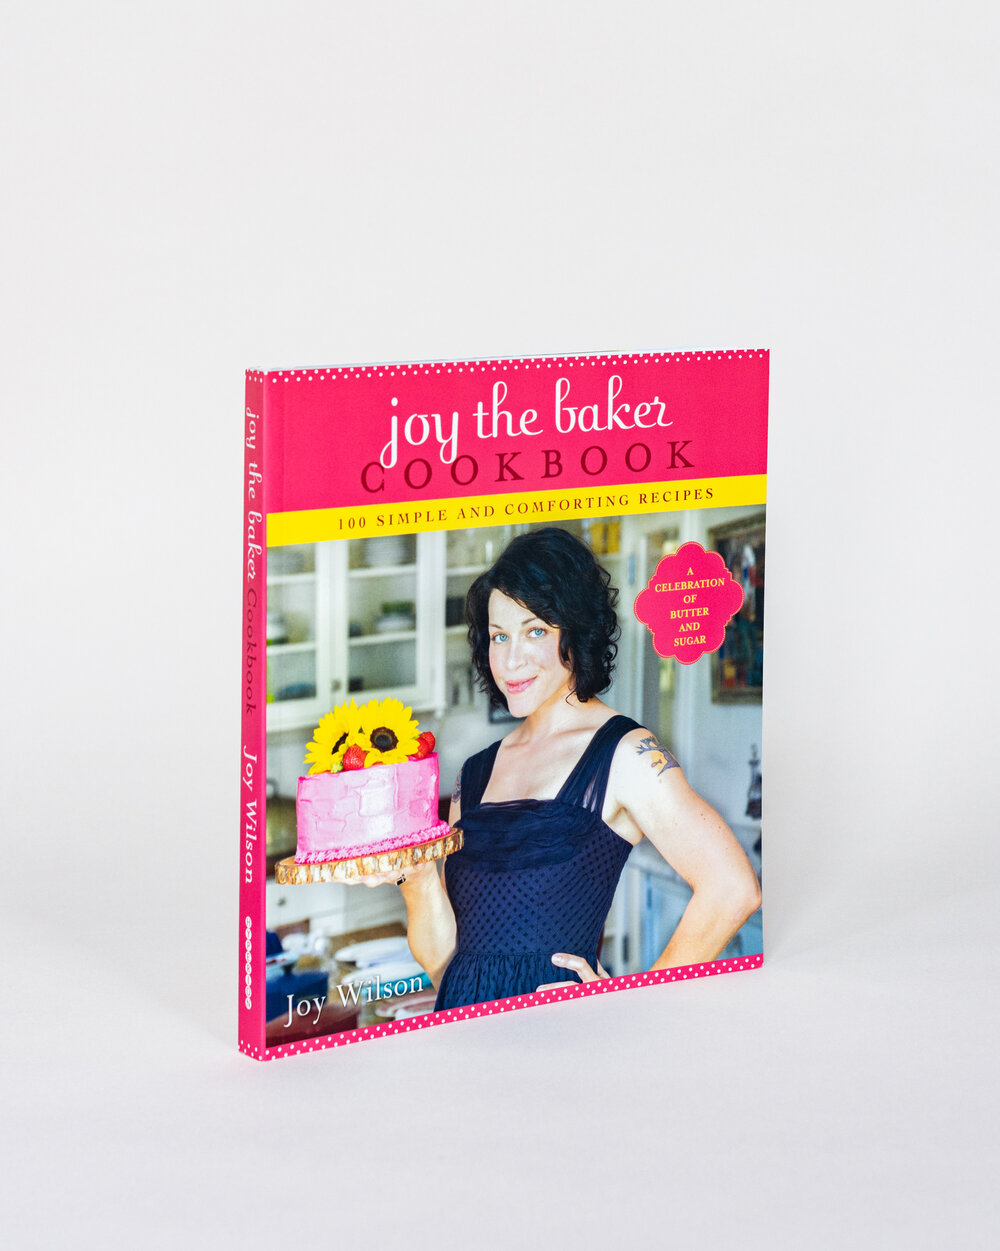 This is 39! - Joy the Baker